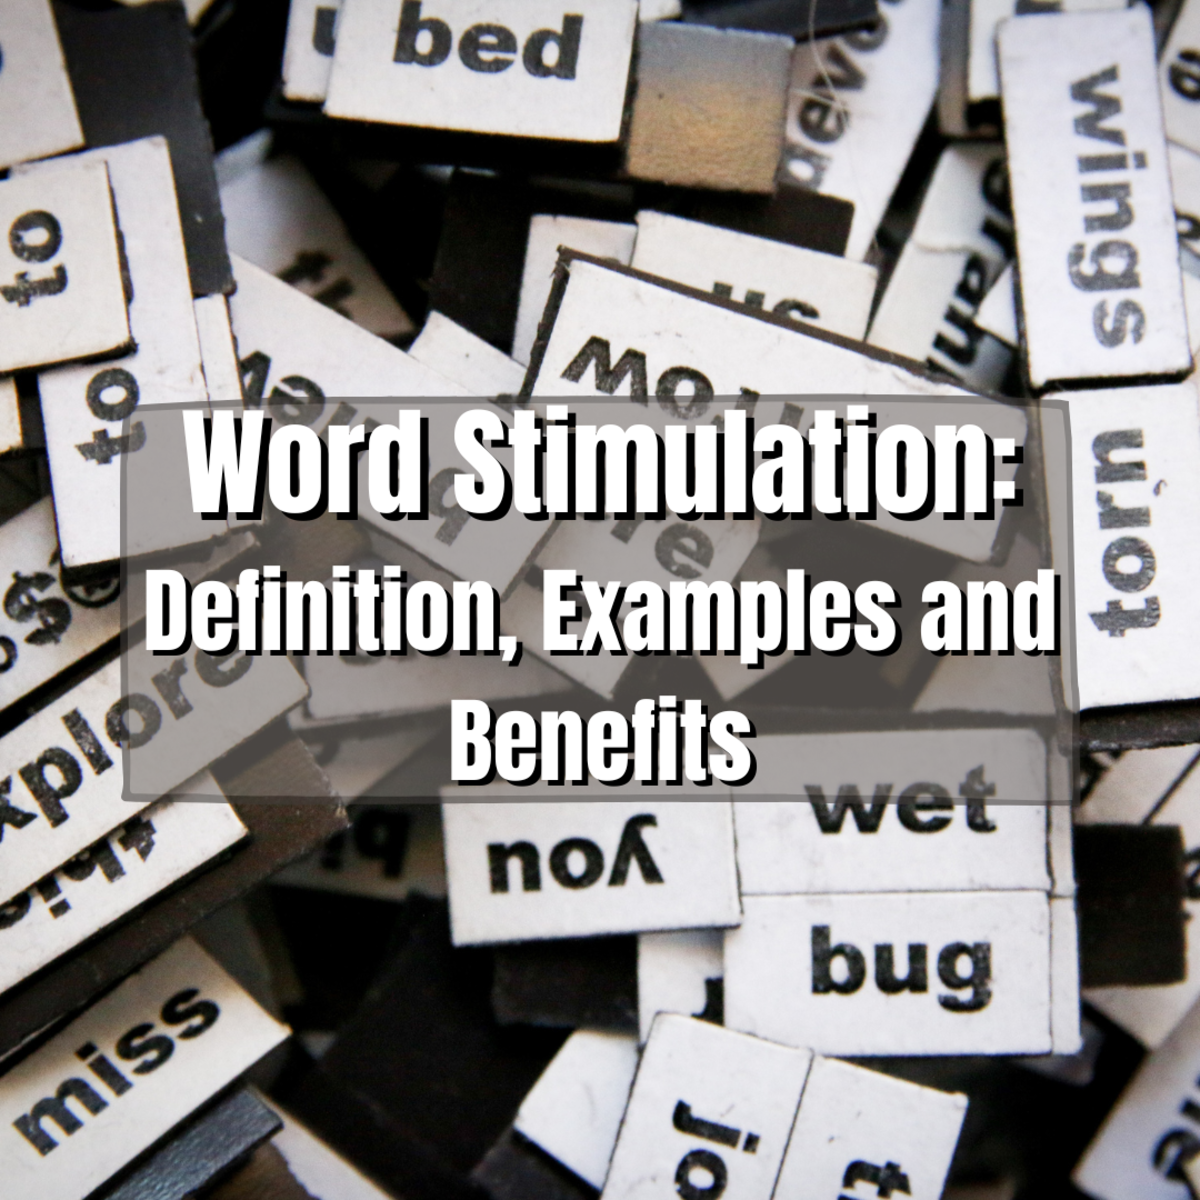 Read on to learn all about what word stimulation is and why it's important! You'll also find some helpful examples.